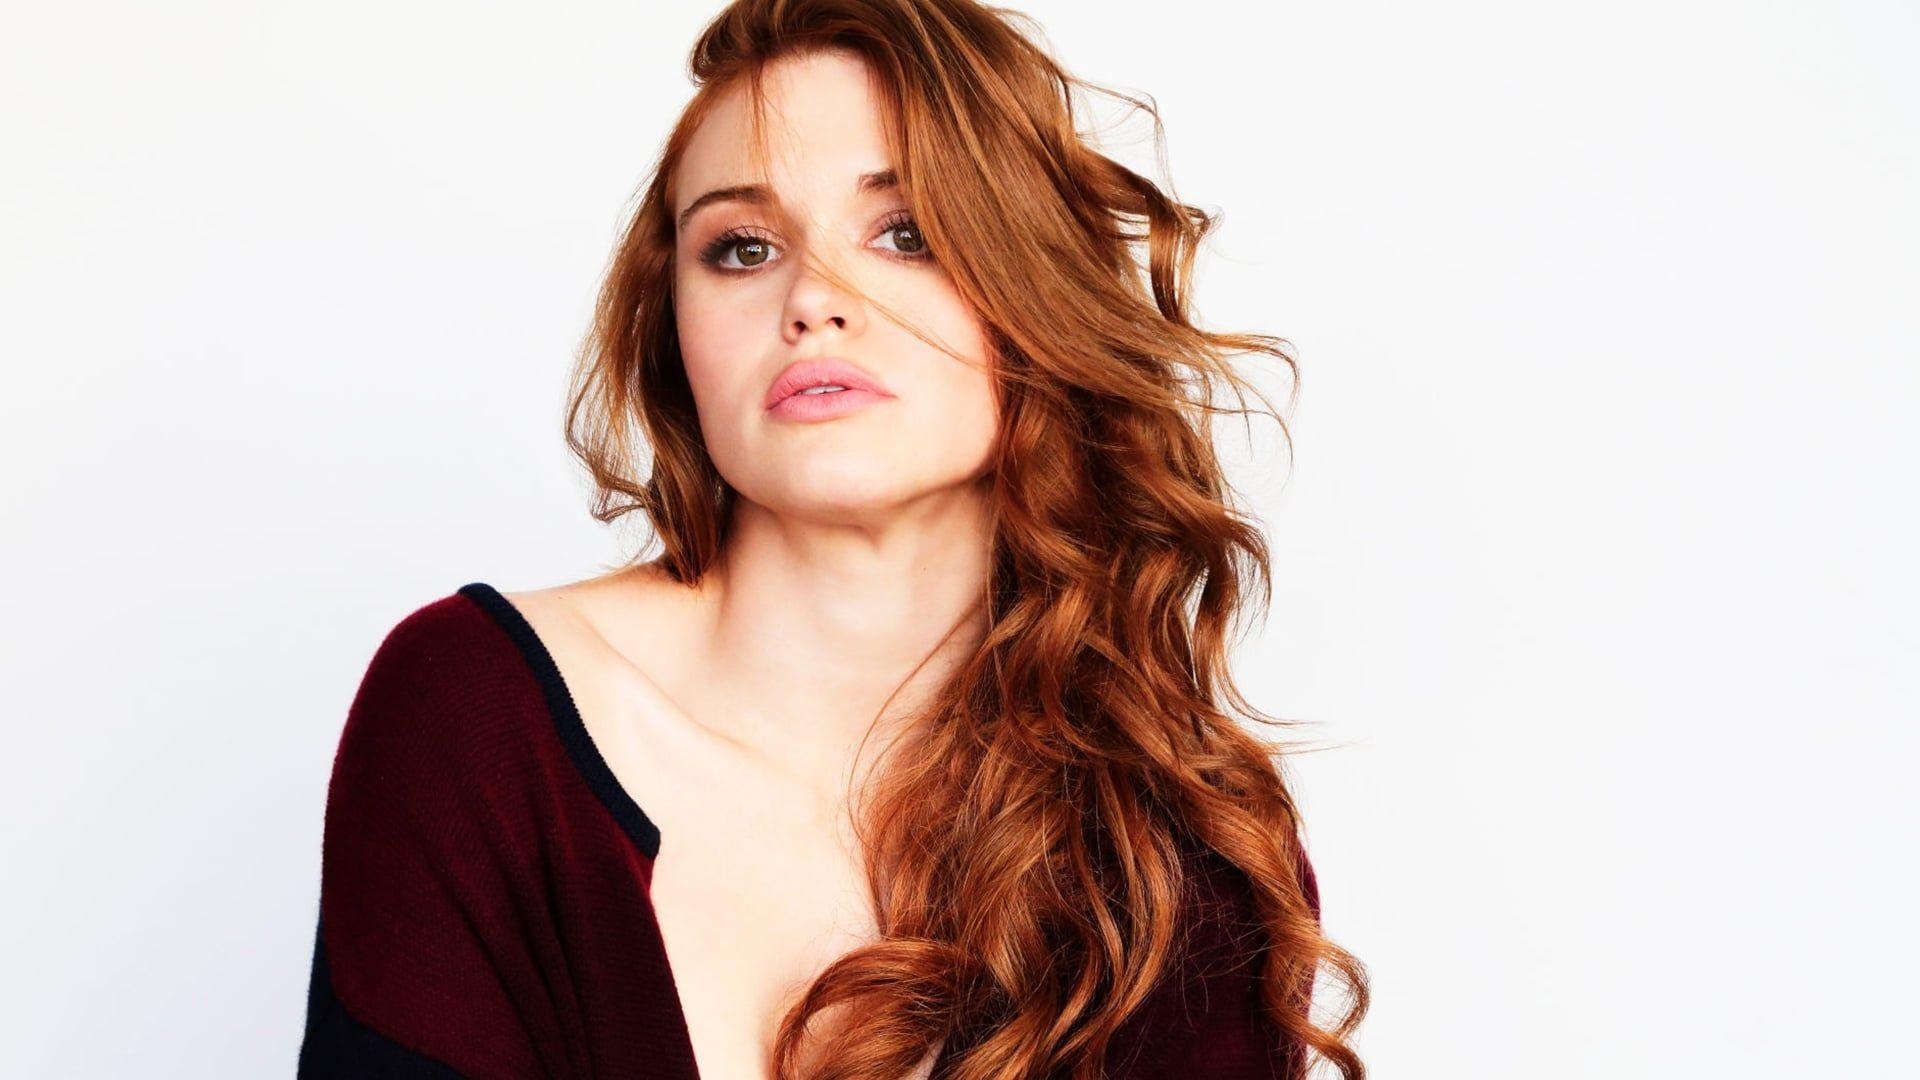 Holland Roden, Movies, Top wallpapers, Celebrity backgrounds, 1920x1080 Full HD Desktop